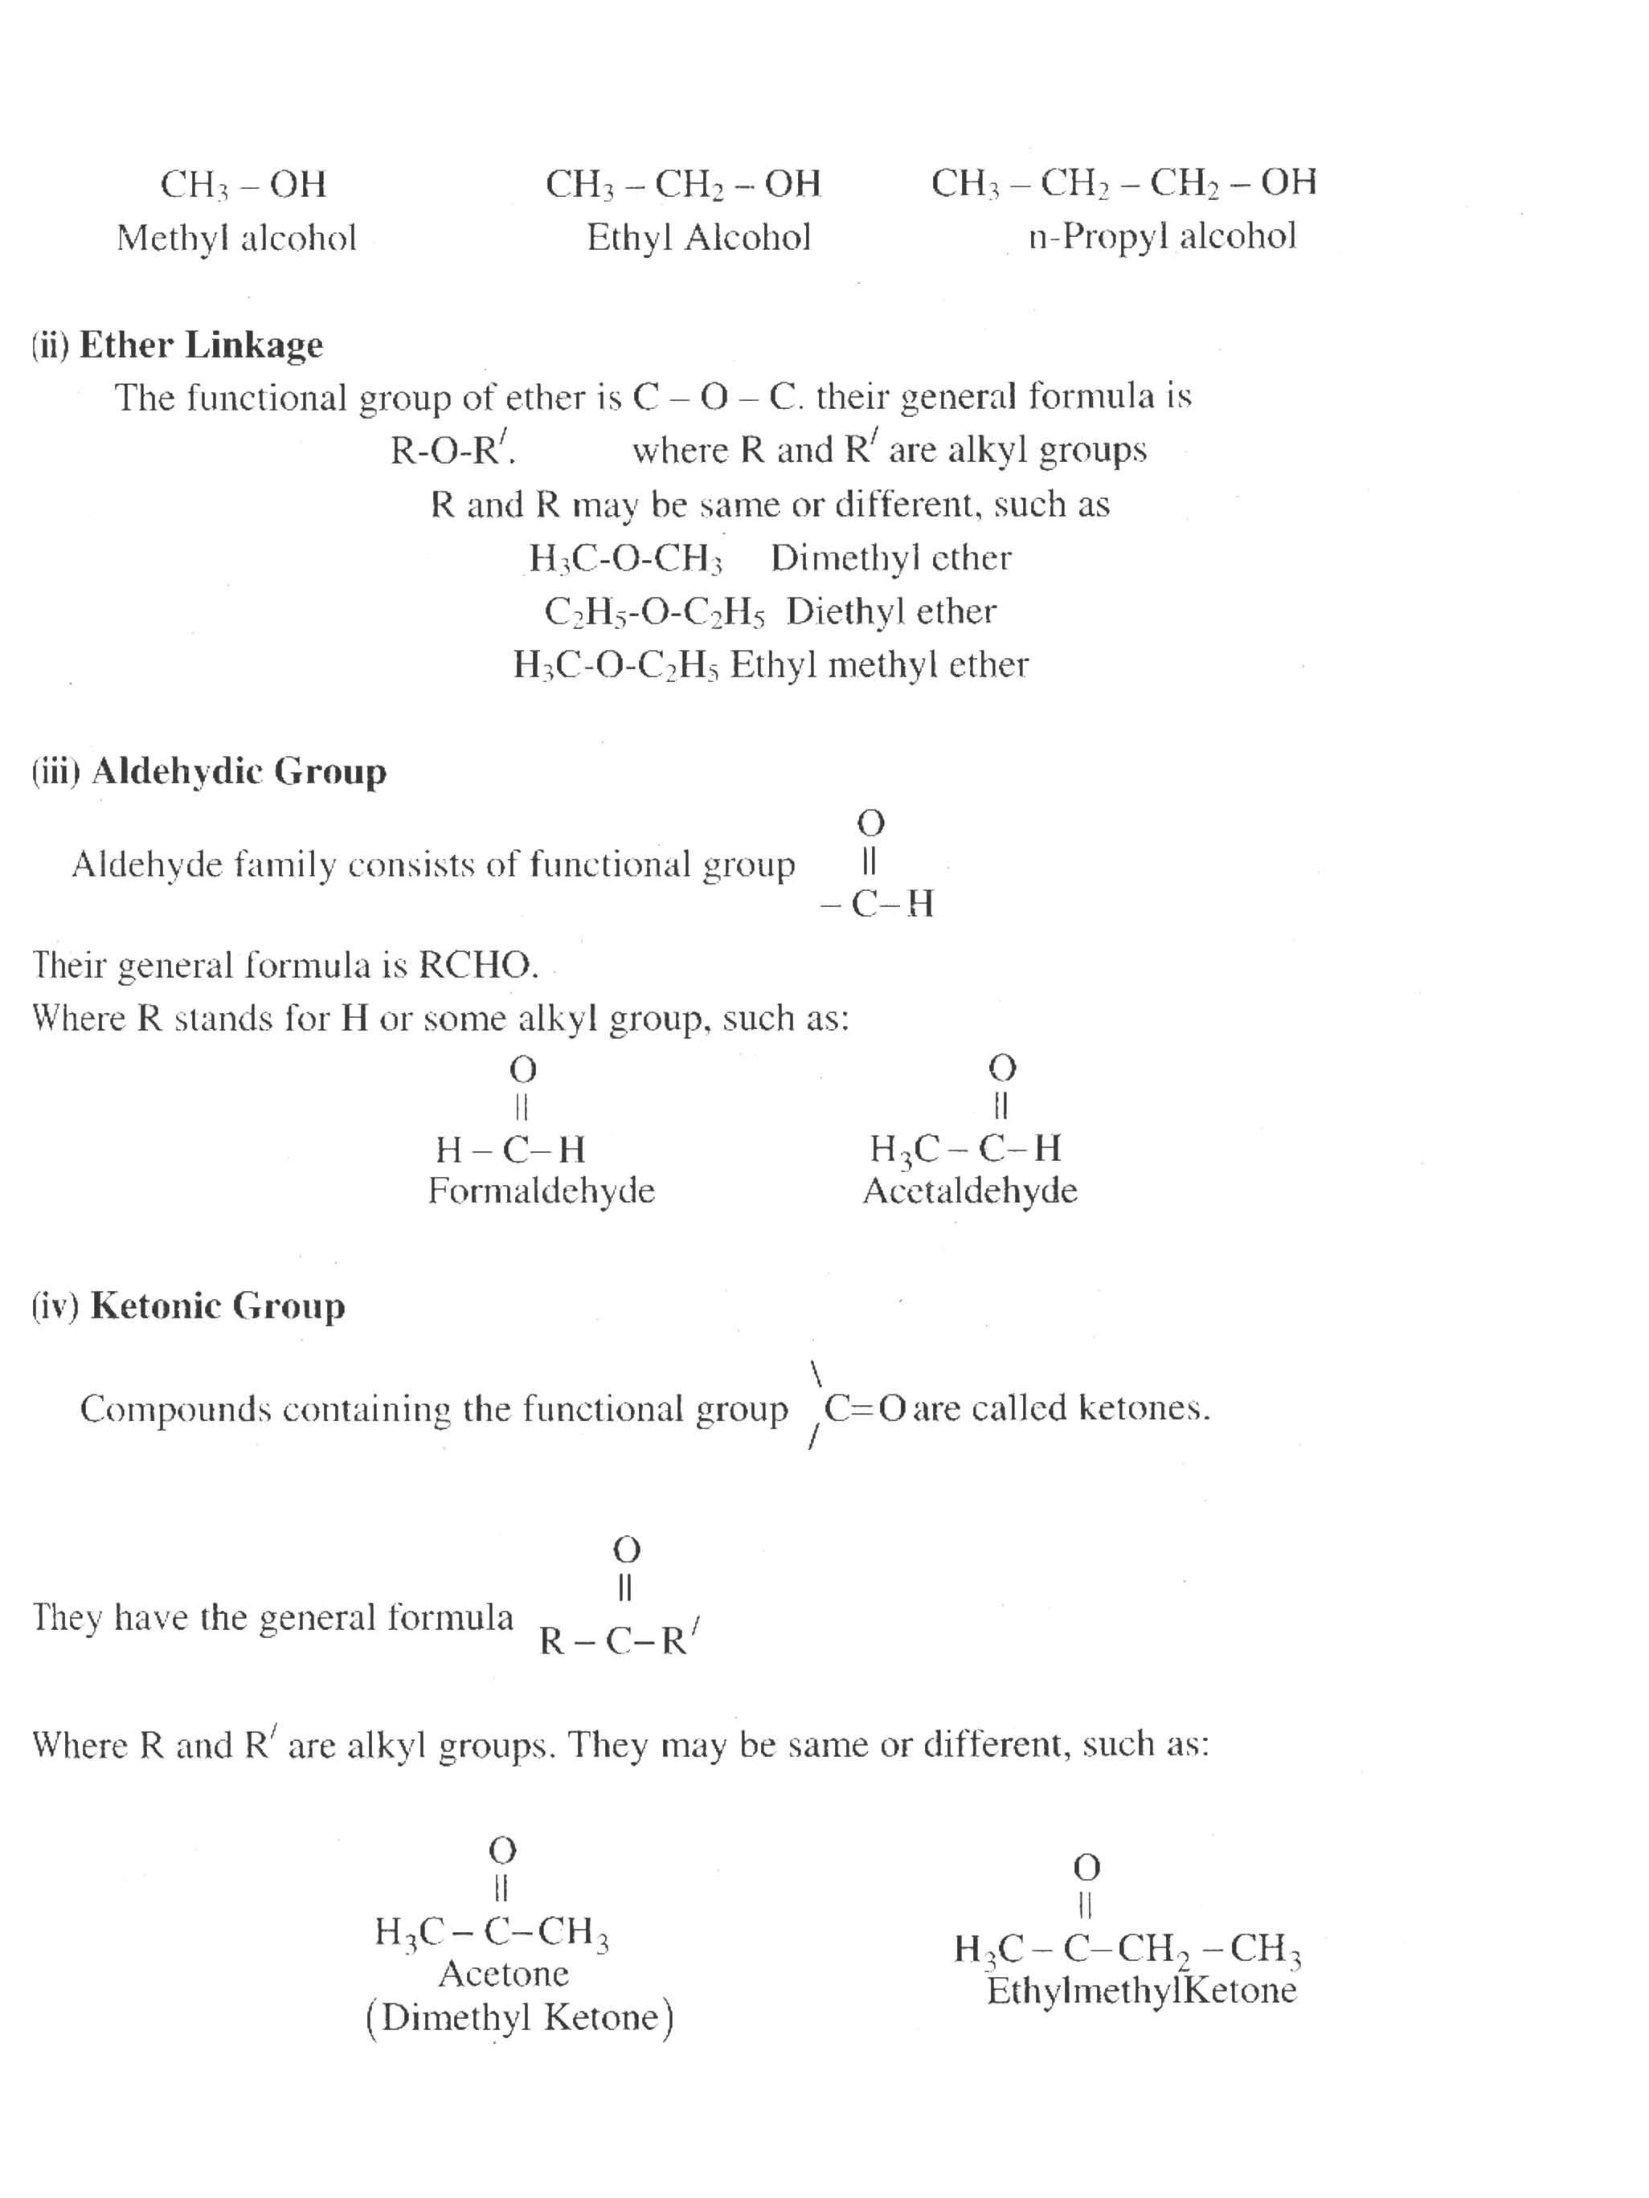 10th Class Chapter 3 Notes Chemistry Chapter: Organic Chemistry {LongAnswers}